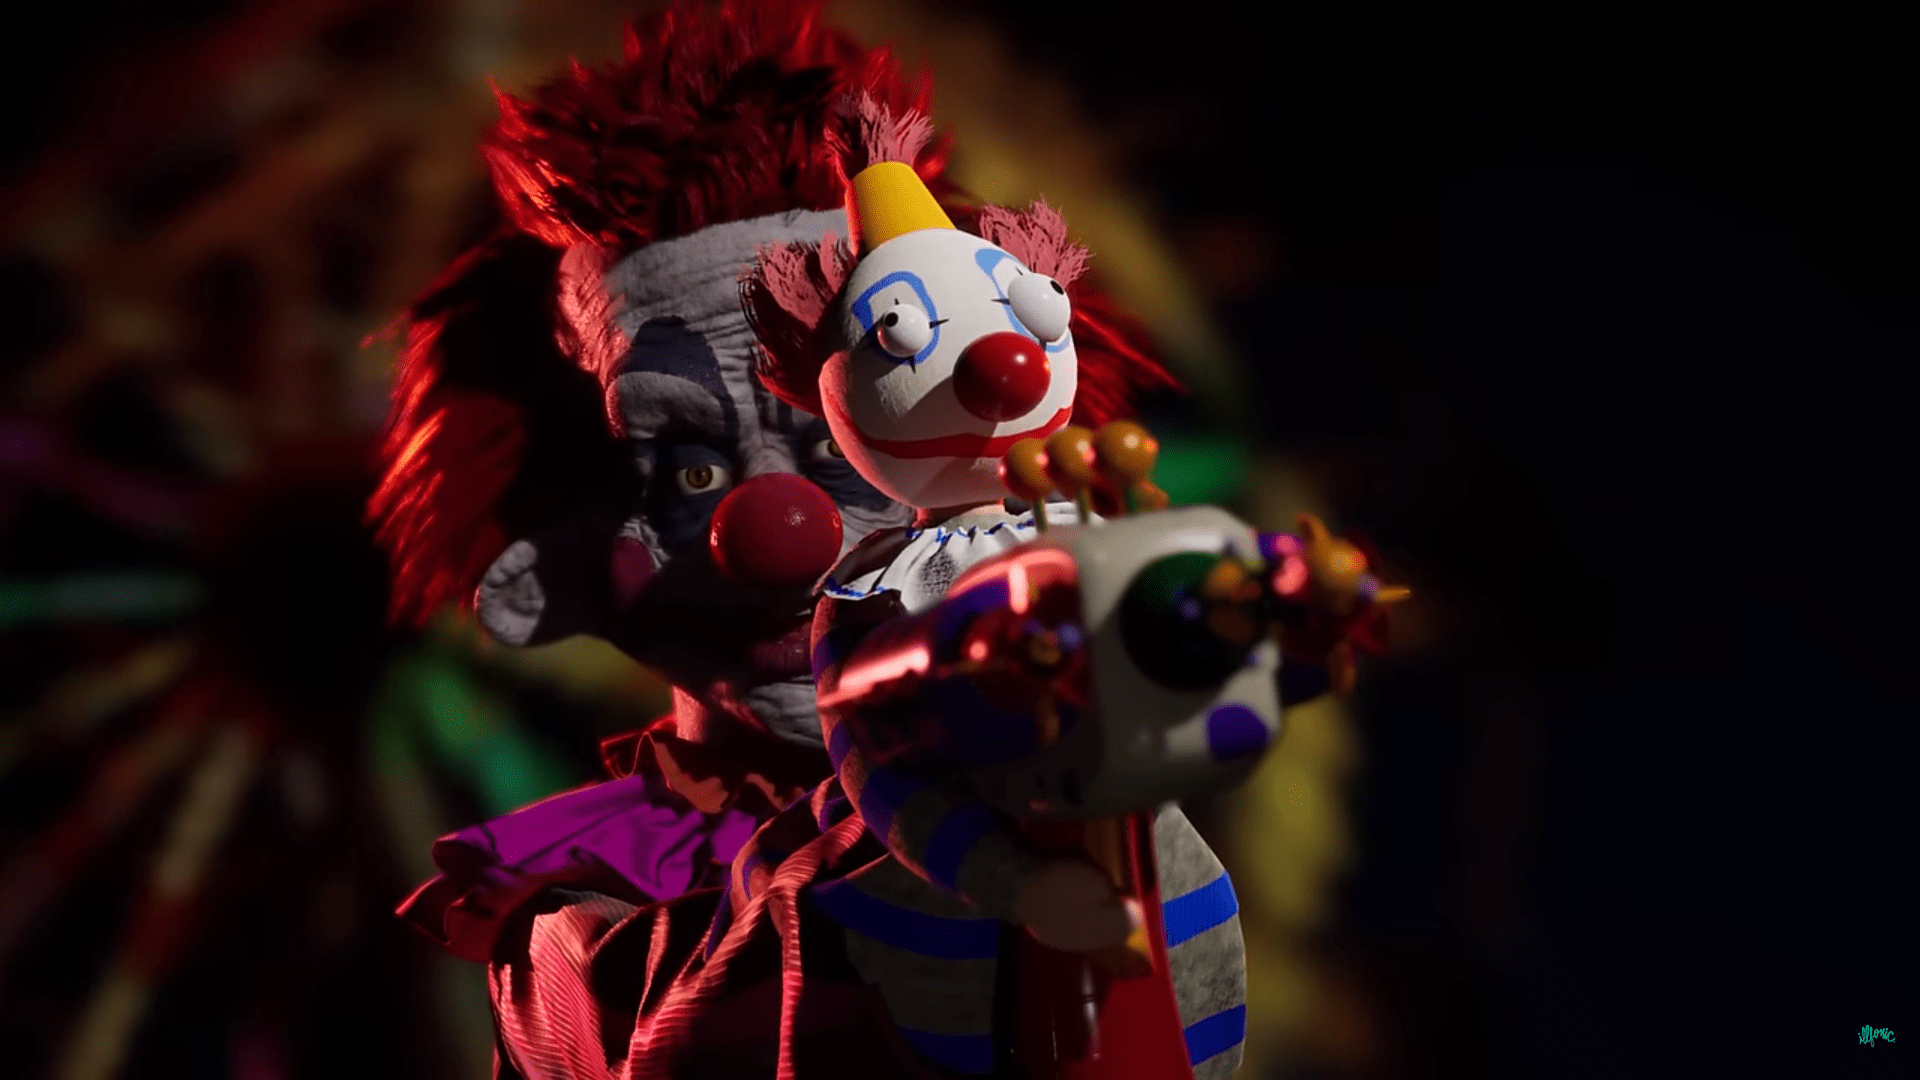 Killer Klowns from Outer Space: The Game functional bot